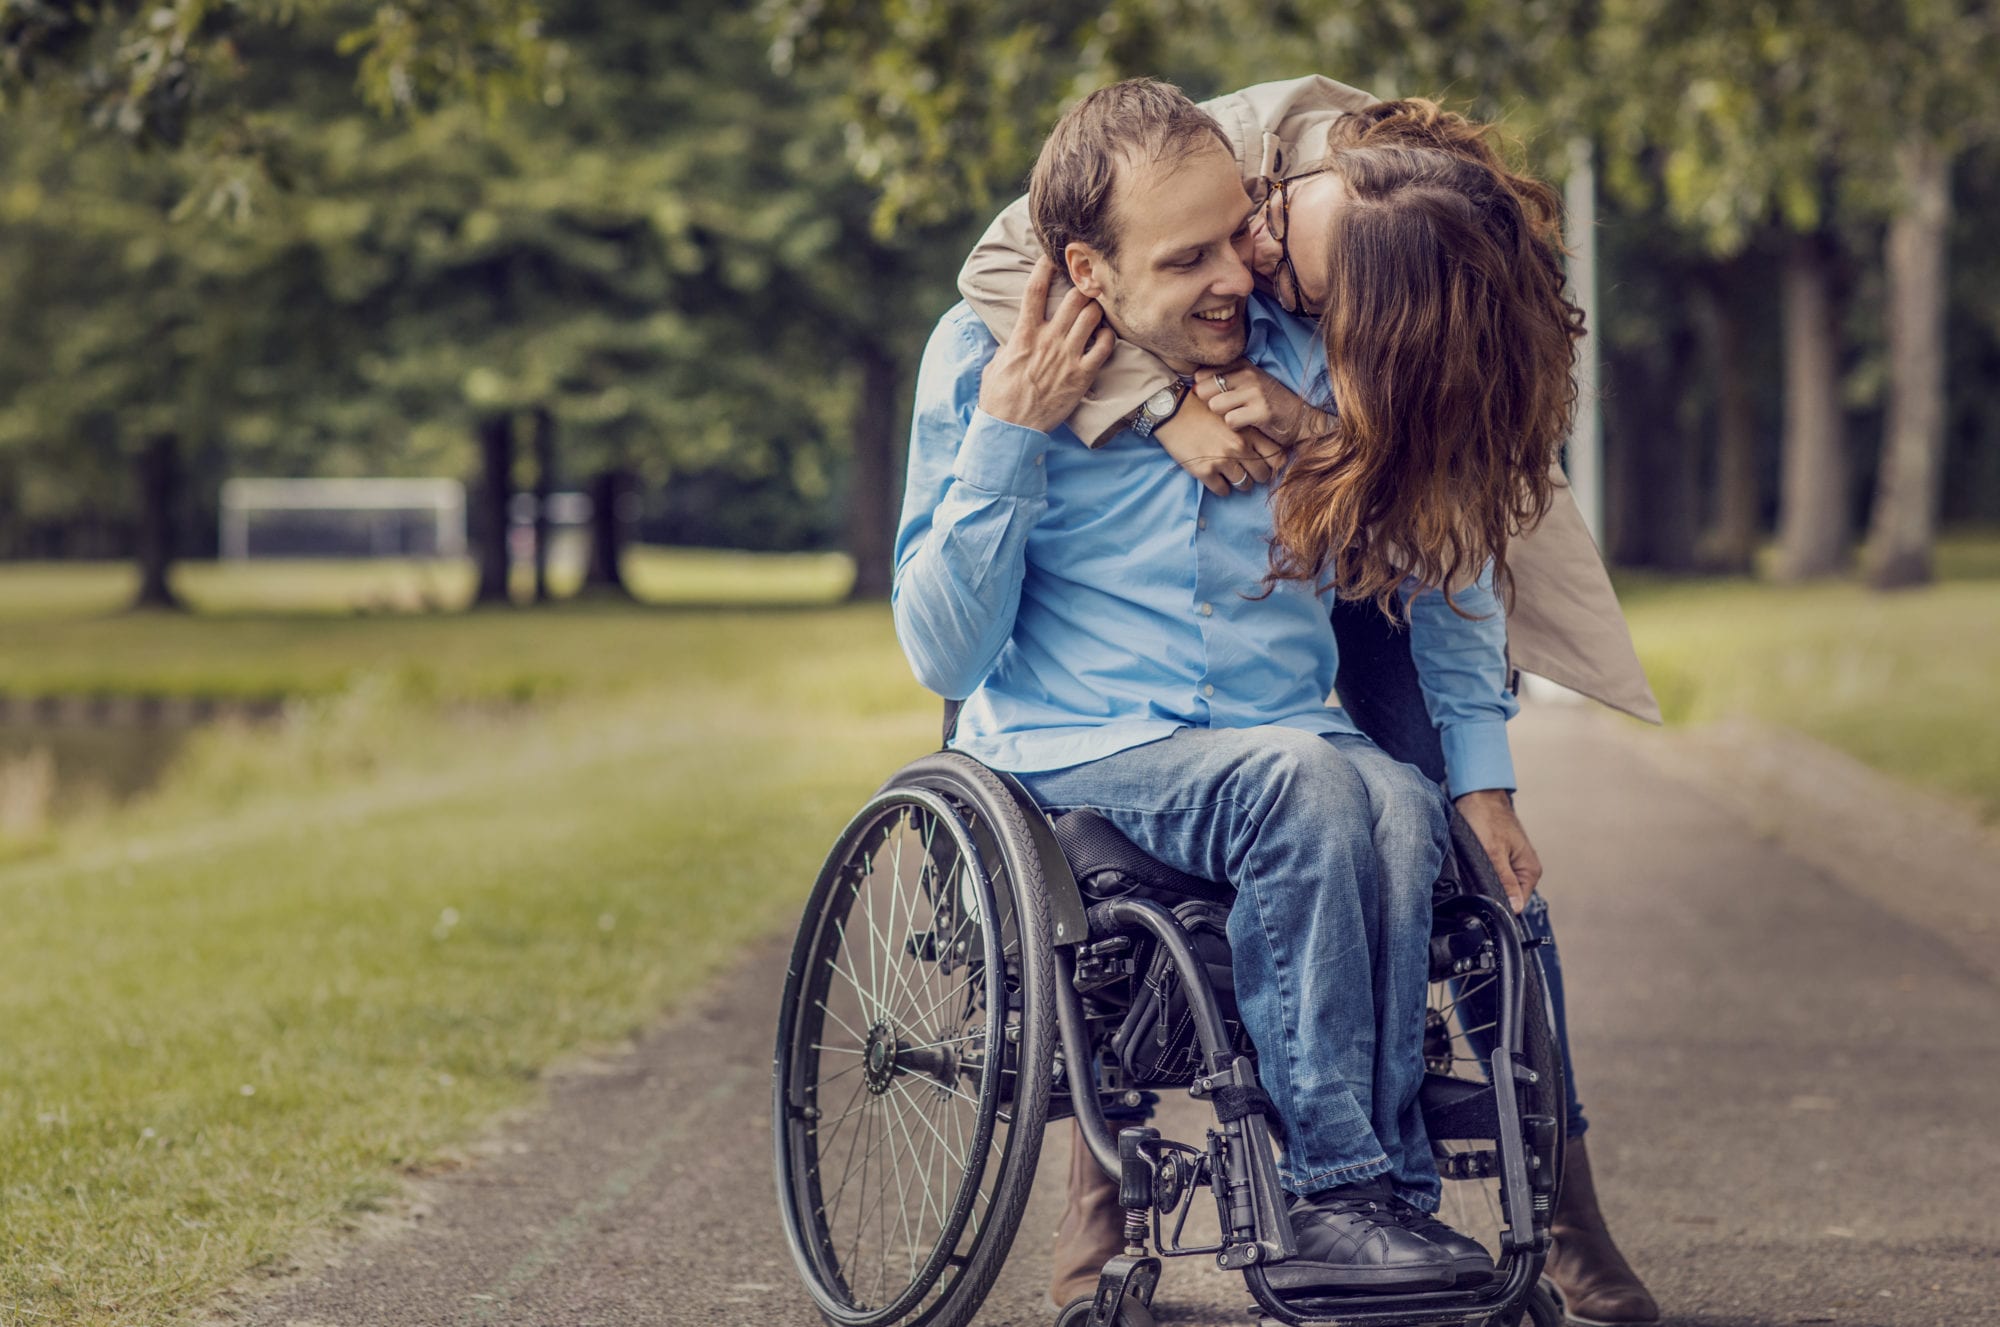 Wheelchair using young man and his girlfriend walking together through a city park